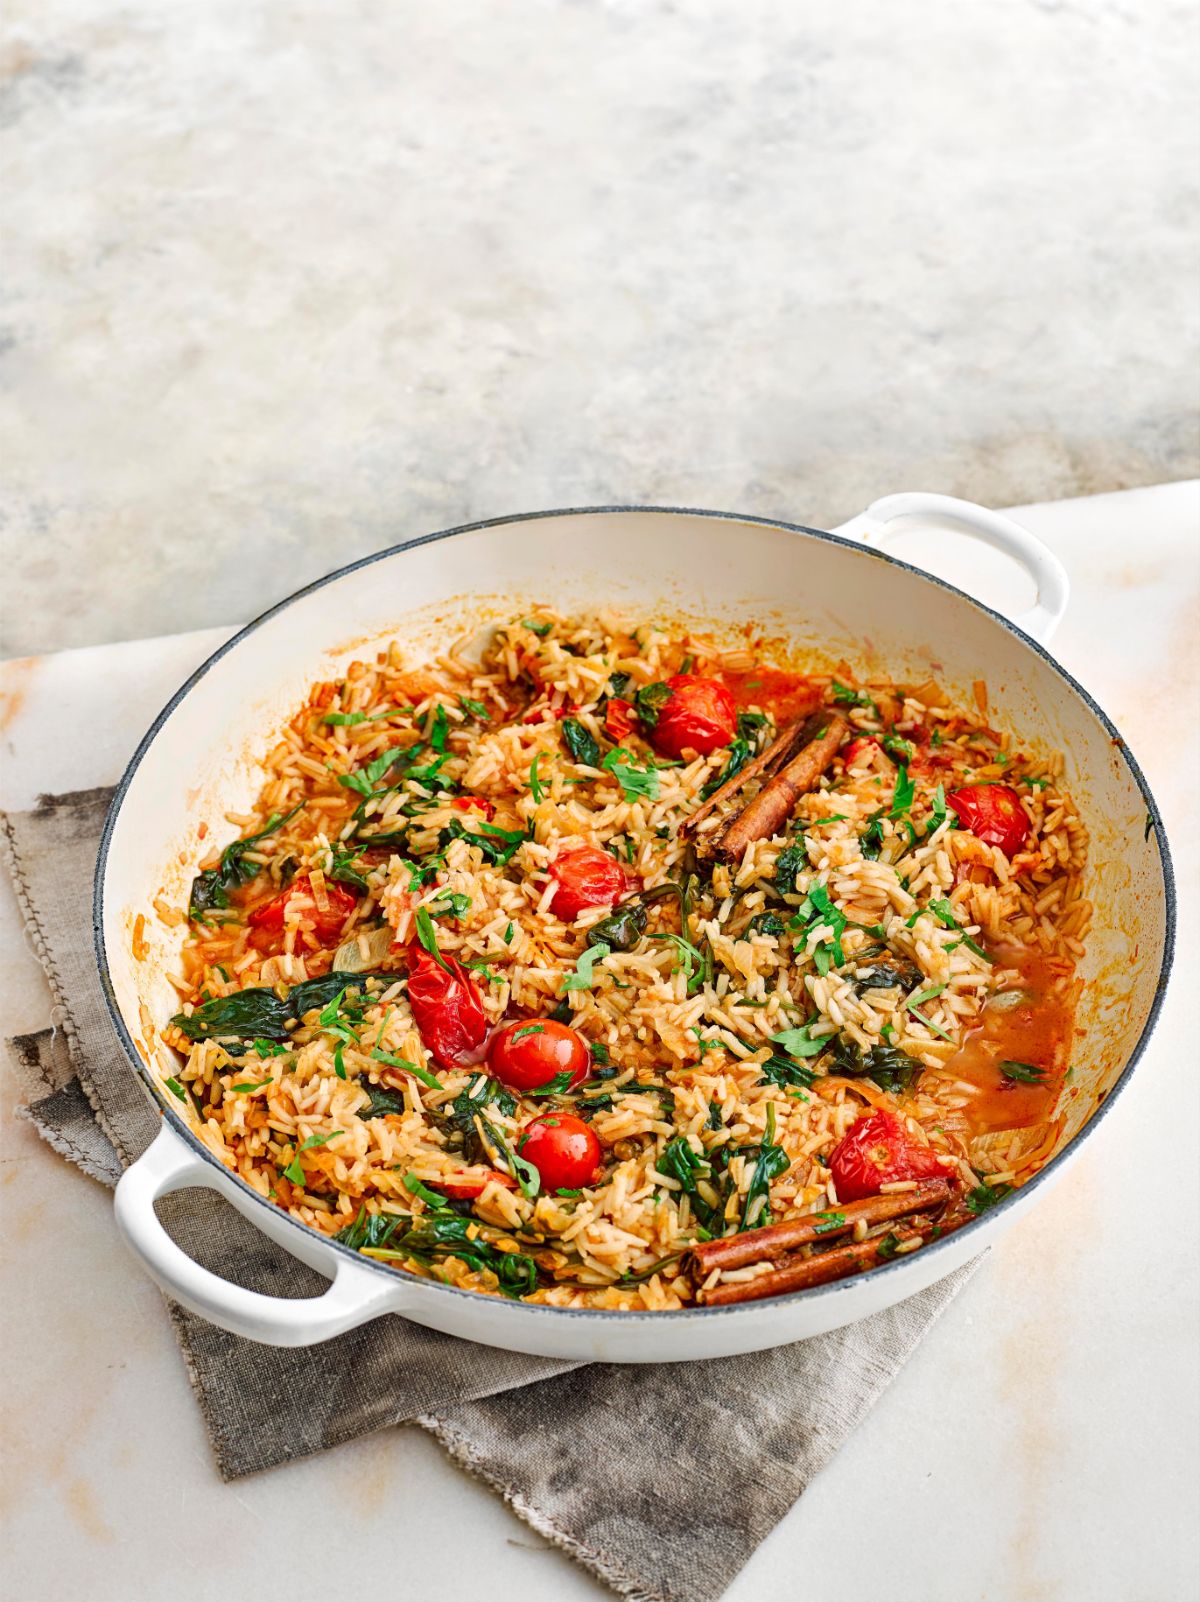 Delicious lemon spinach and cherry tomato pilaf in a white bowl.